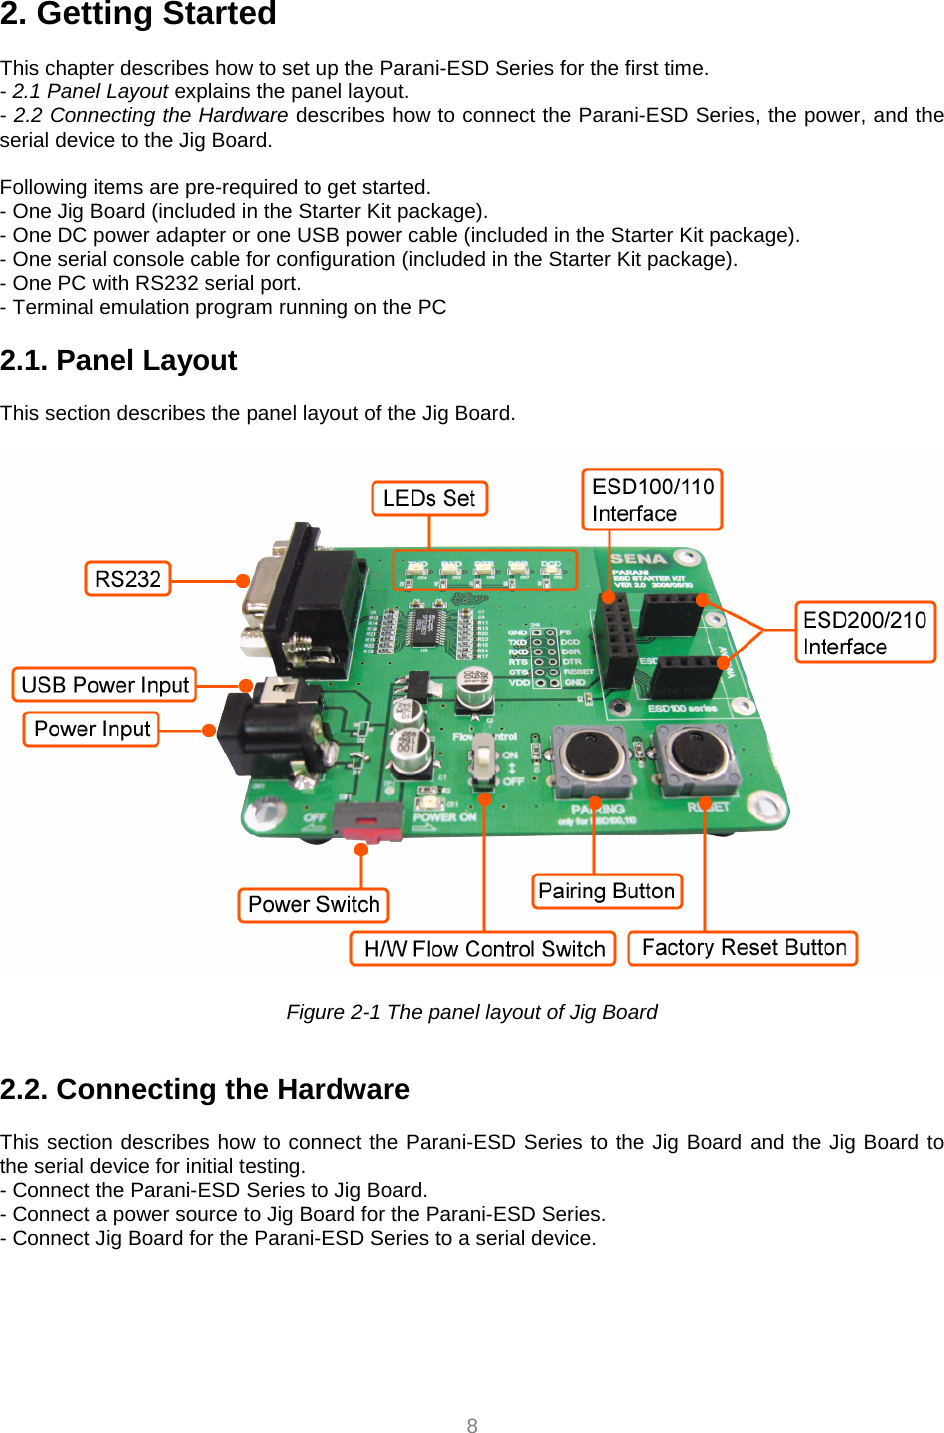  8 2. Getting Started  This chapter describes how to set up the Parani-ESD Series for the first time. - 2.1 Panel Layout explains the panel layout. - 2.2 Connecting the Hardware describes how to connect the Parani-ESD Series, the power, and the serial device to the Jig Board.  Following items are pre-required to get started. - One Jig Board (included in the Starter Kit package). - One DC power adapter or one USB power cable (included in the Starter Kit package). - One serial console cable for configuration (included in the Starter Kit package). - One PC with RS232 serial port. - Terminal emulation program running on the PC  2.1. Panel Layout             This section describes the panel layout of the Jig Board.      Figure 2-1 The panel layout of Jig Board   2.2. Connecting the Hardware             This section describes how to connect the Parani-ESD Series to the Jig Board and the Jig Board to the serial device for initial testing.   - Connect the Parani-ESD Series to Jig Board. - Connect a power source to Jig Board for the Parani-ESD Series. - Connect Jig Board for the Parani-ESD Series to a serial device.     